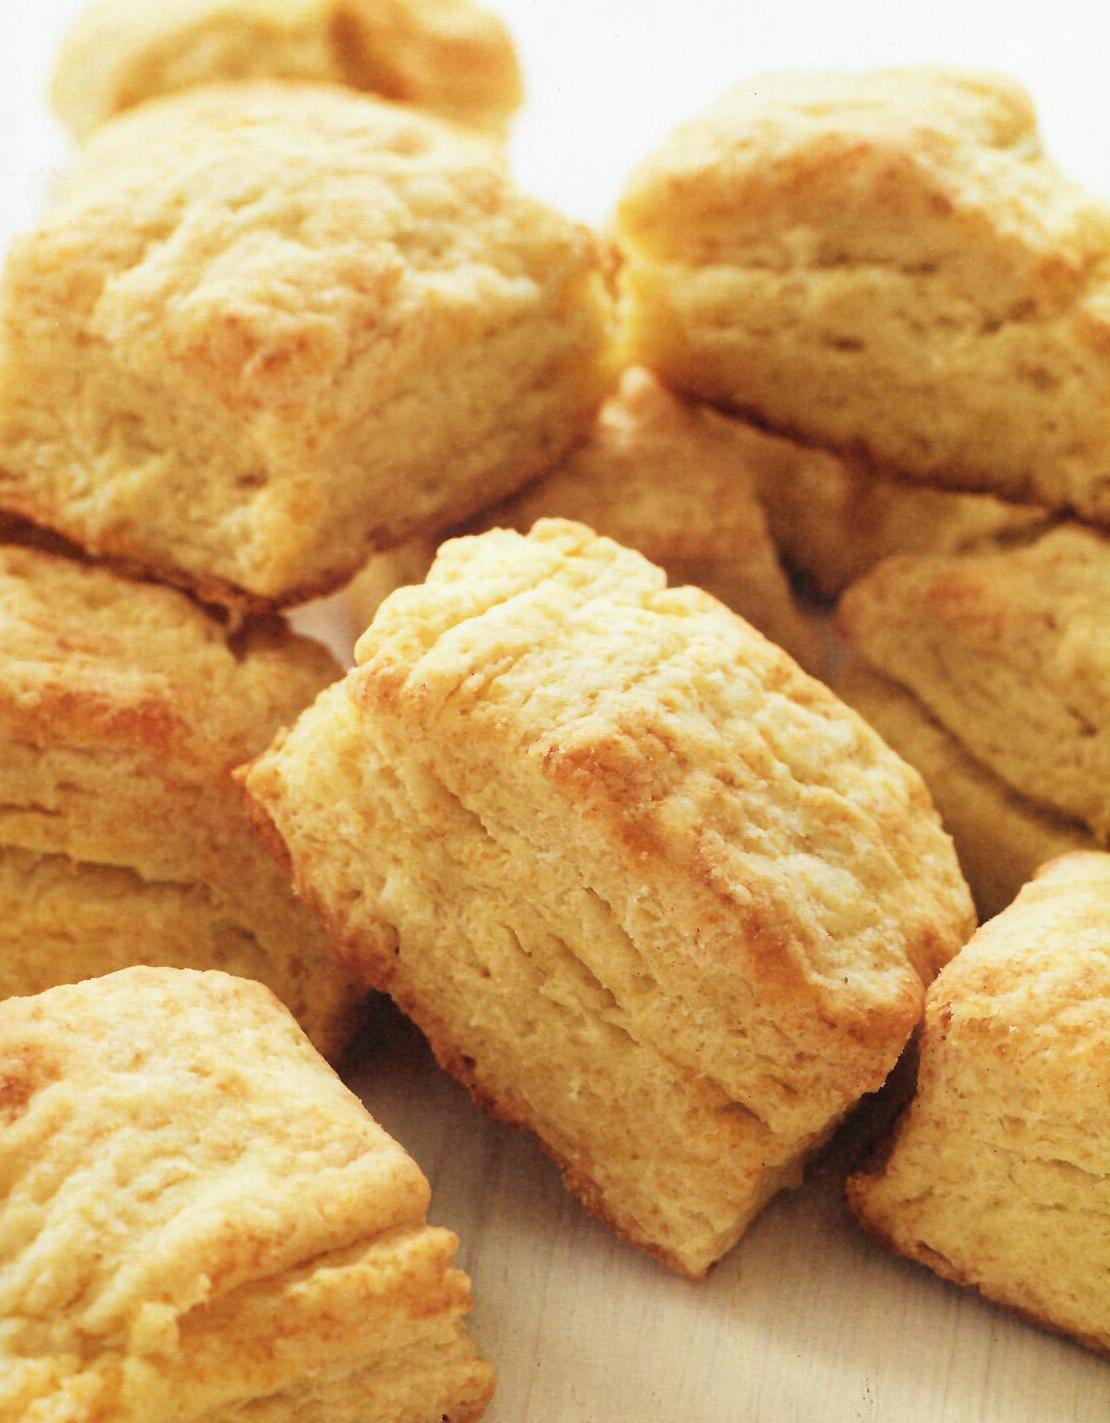  There's nothing quite like the aroma of fresh biscuits baking in the oven.